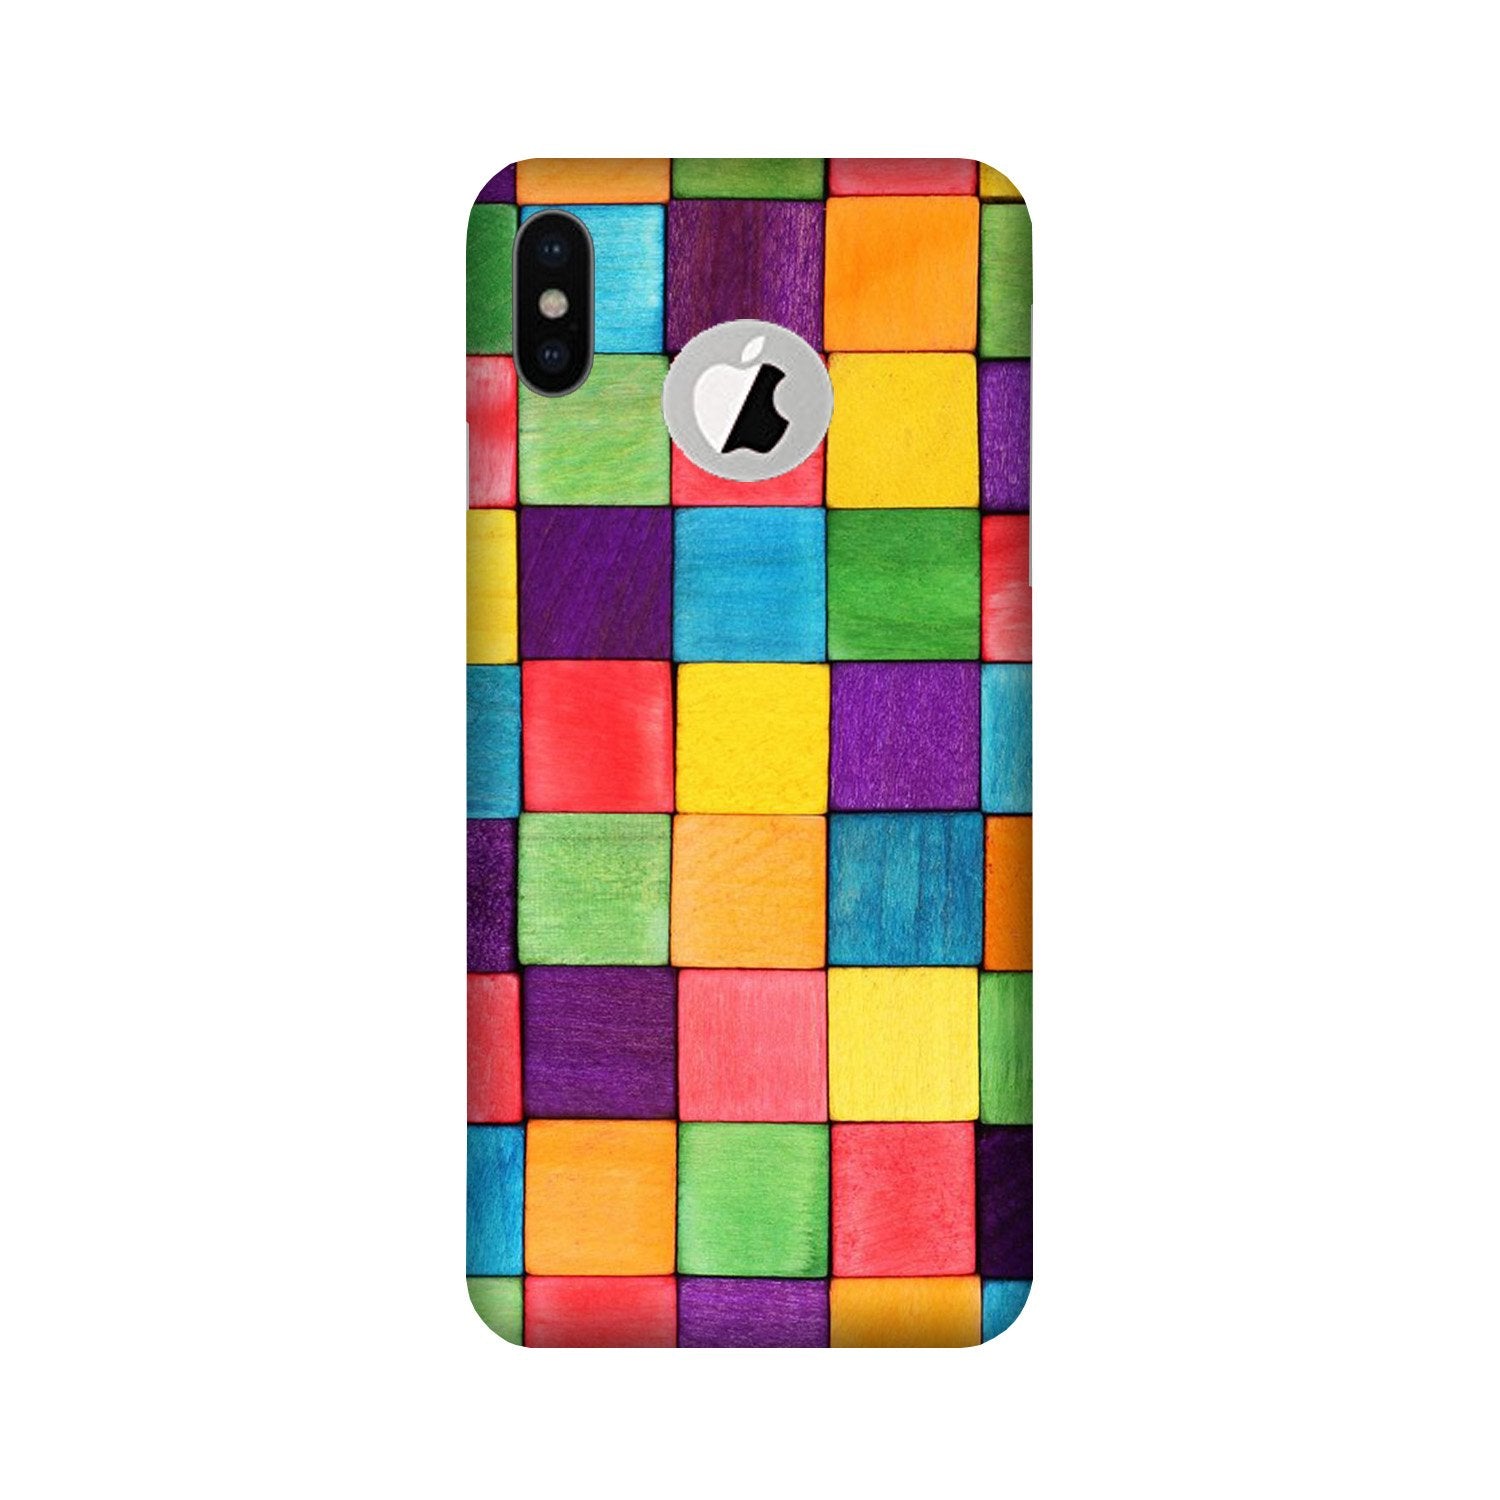 Colorful Square Case for iPhone Xs logo cut(Design No. 218)